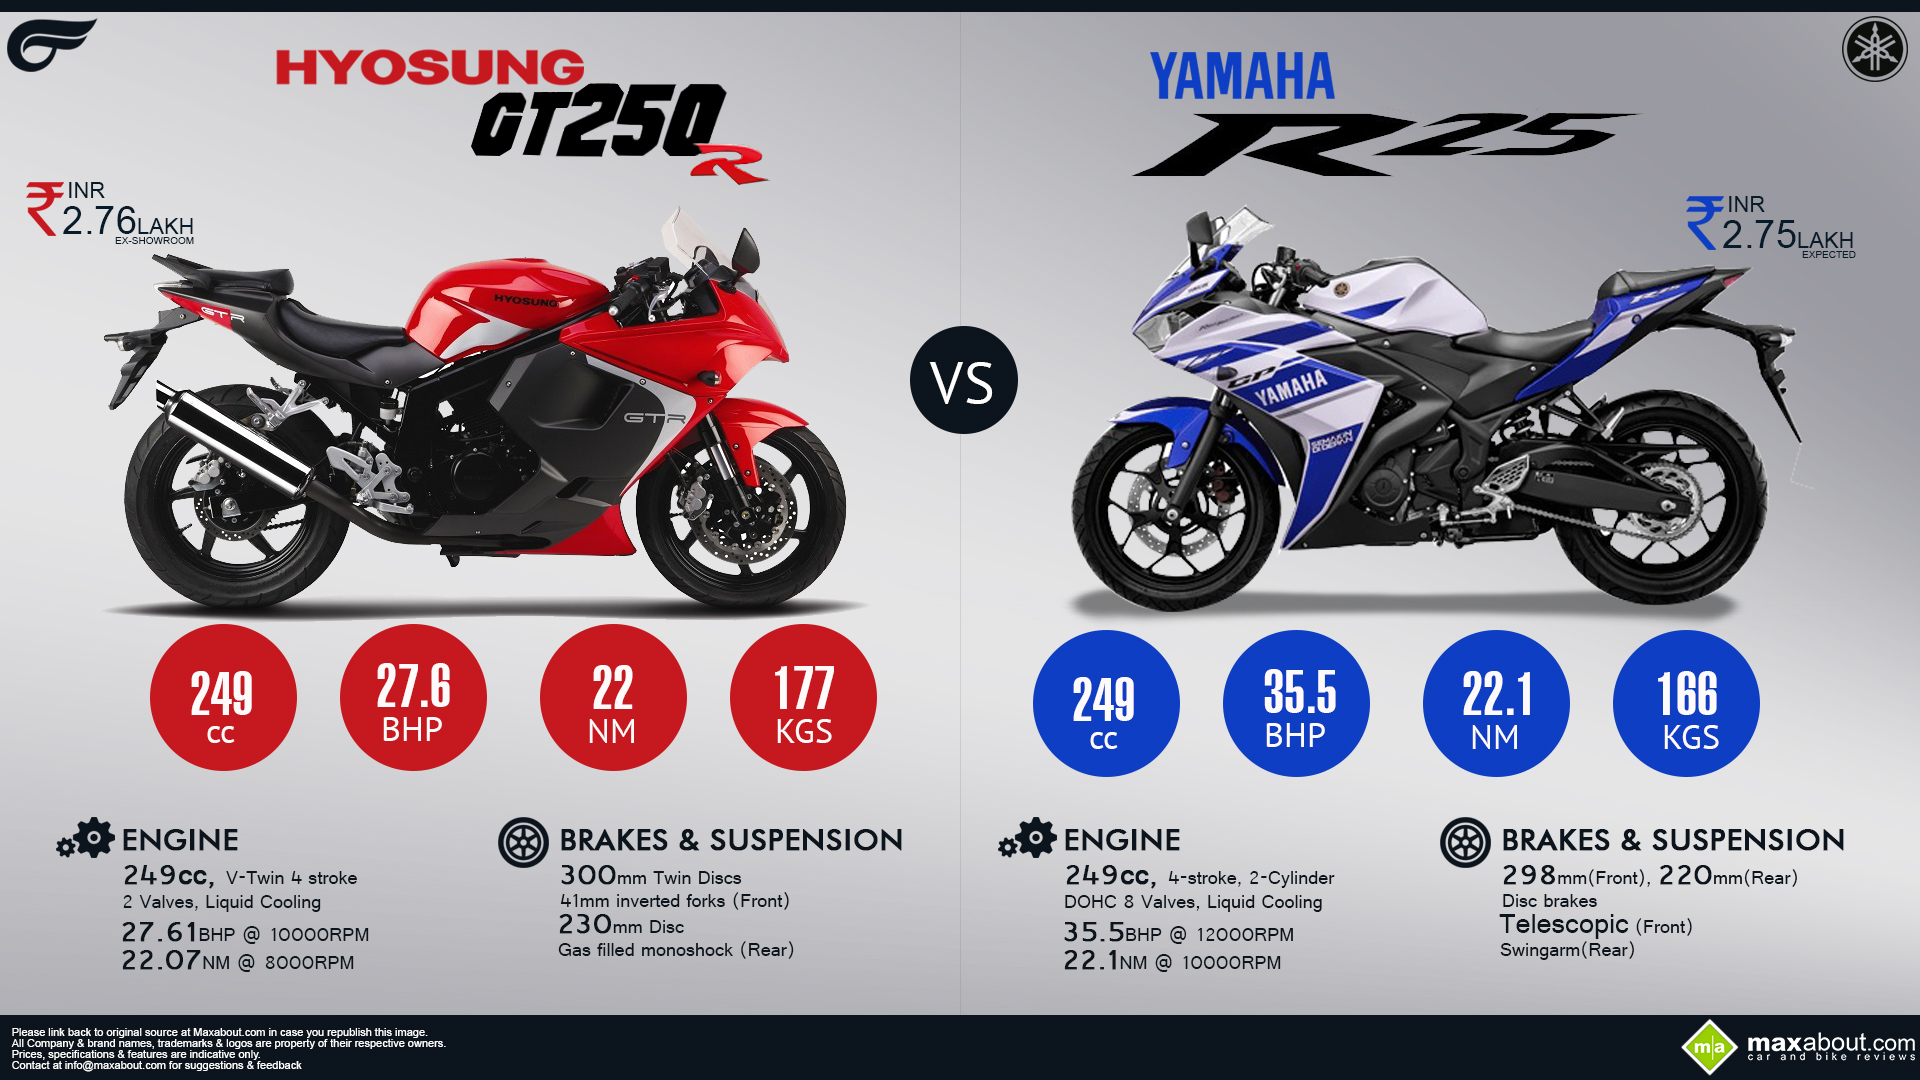 View Full Size - Hyosung Gt250r Vs R25 , HD Wallpaper & Backgrounds